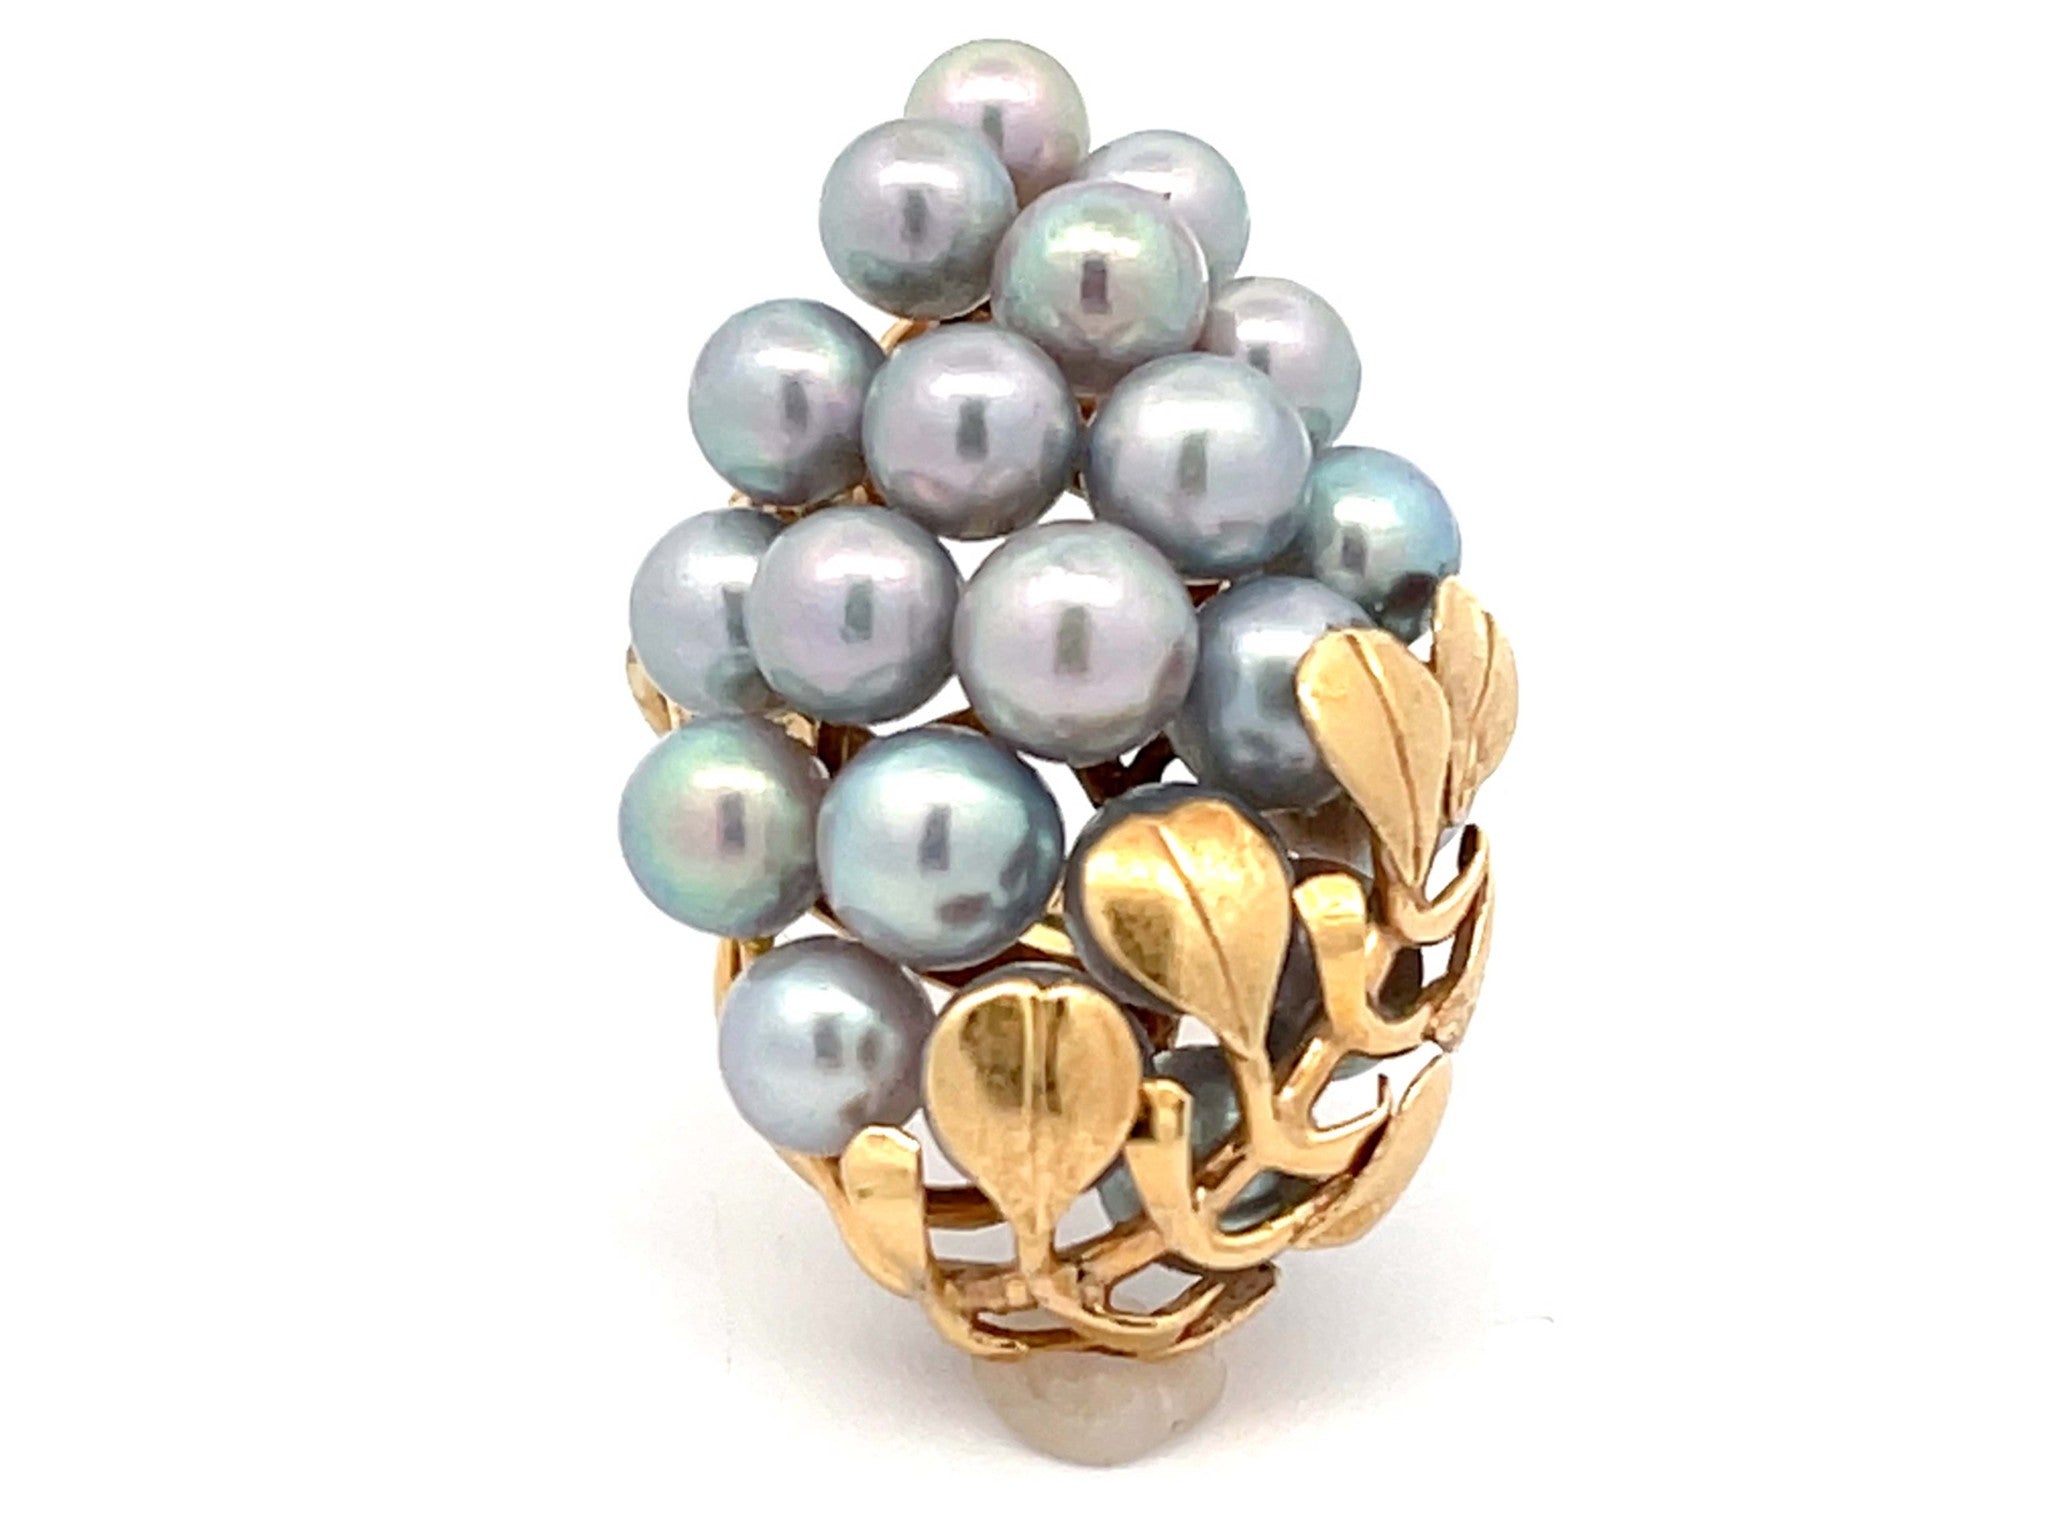 Mings Large Silver Pearl and Leaf Ring in 14k Yellow Gold